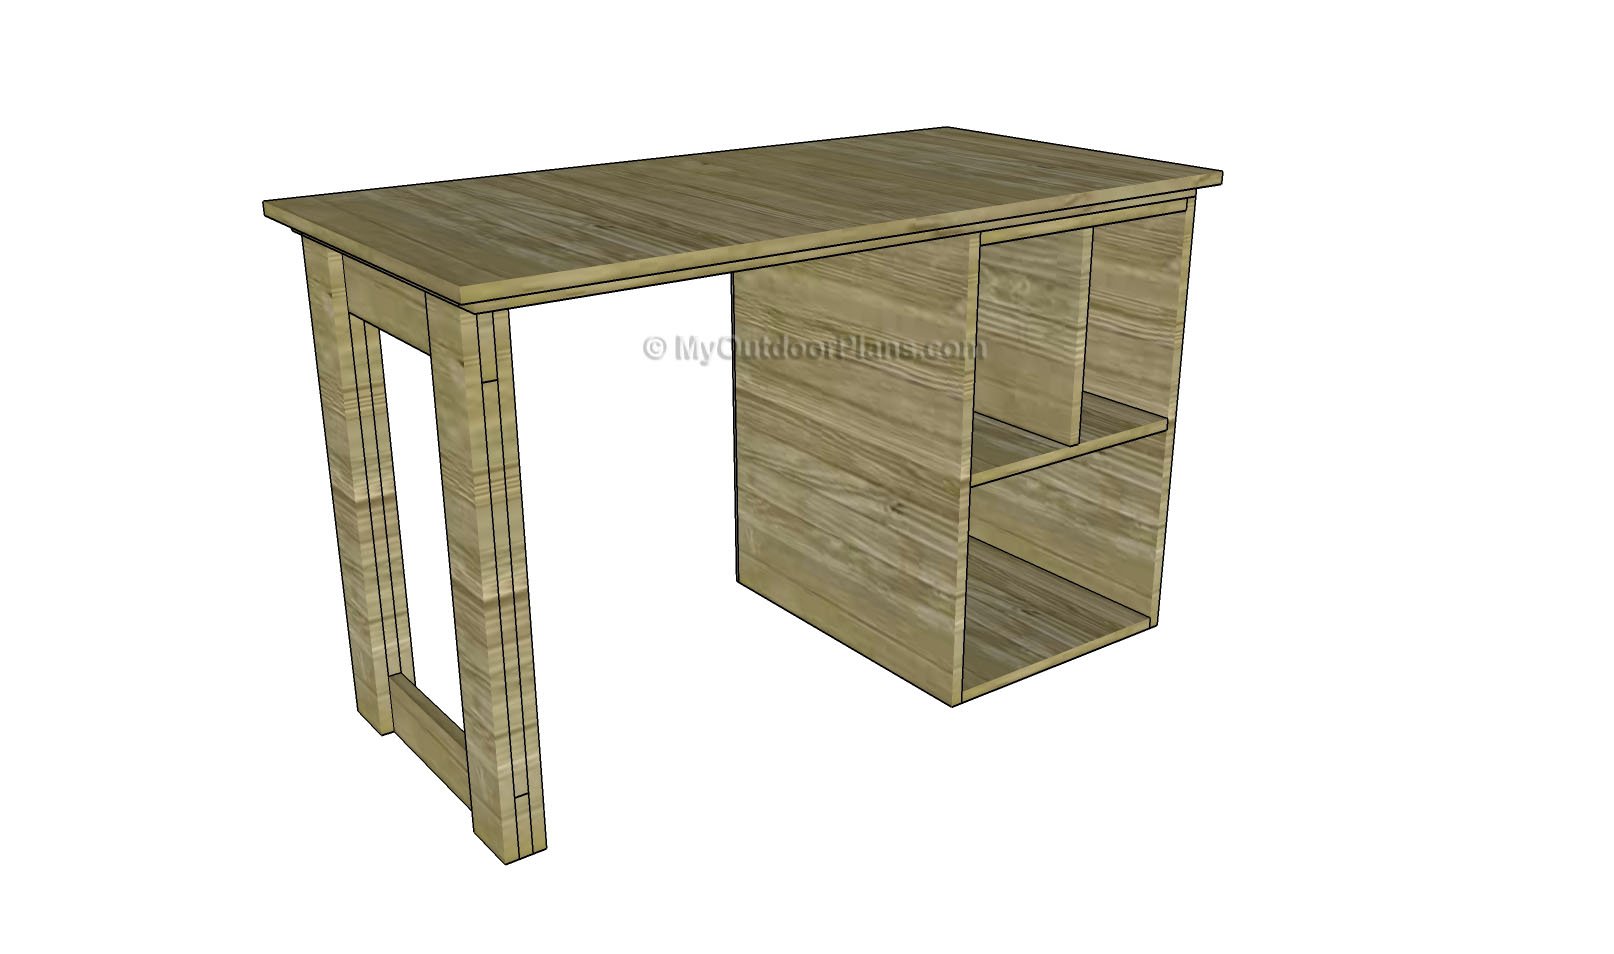 woodworking plans desk | Fabulous Woodworking Projects